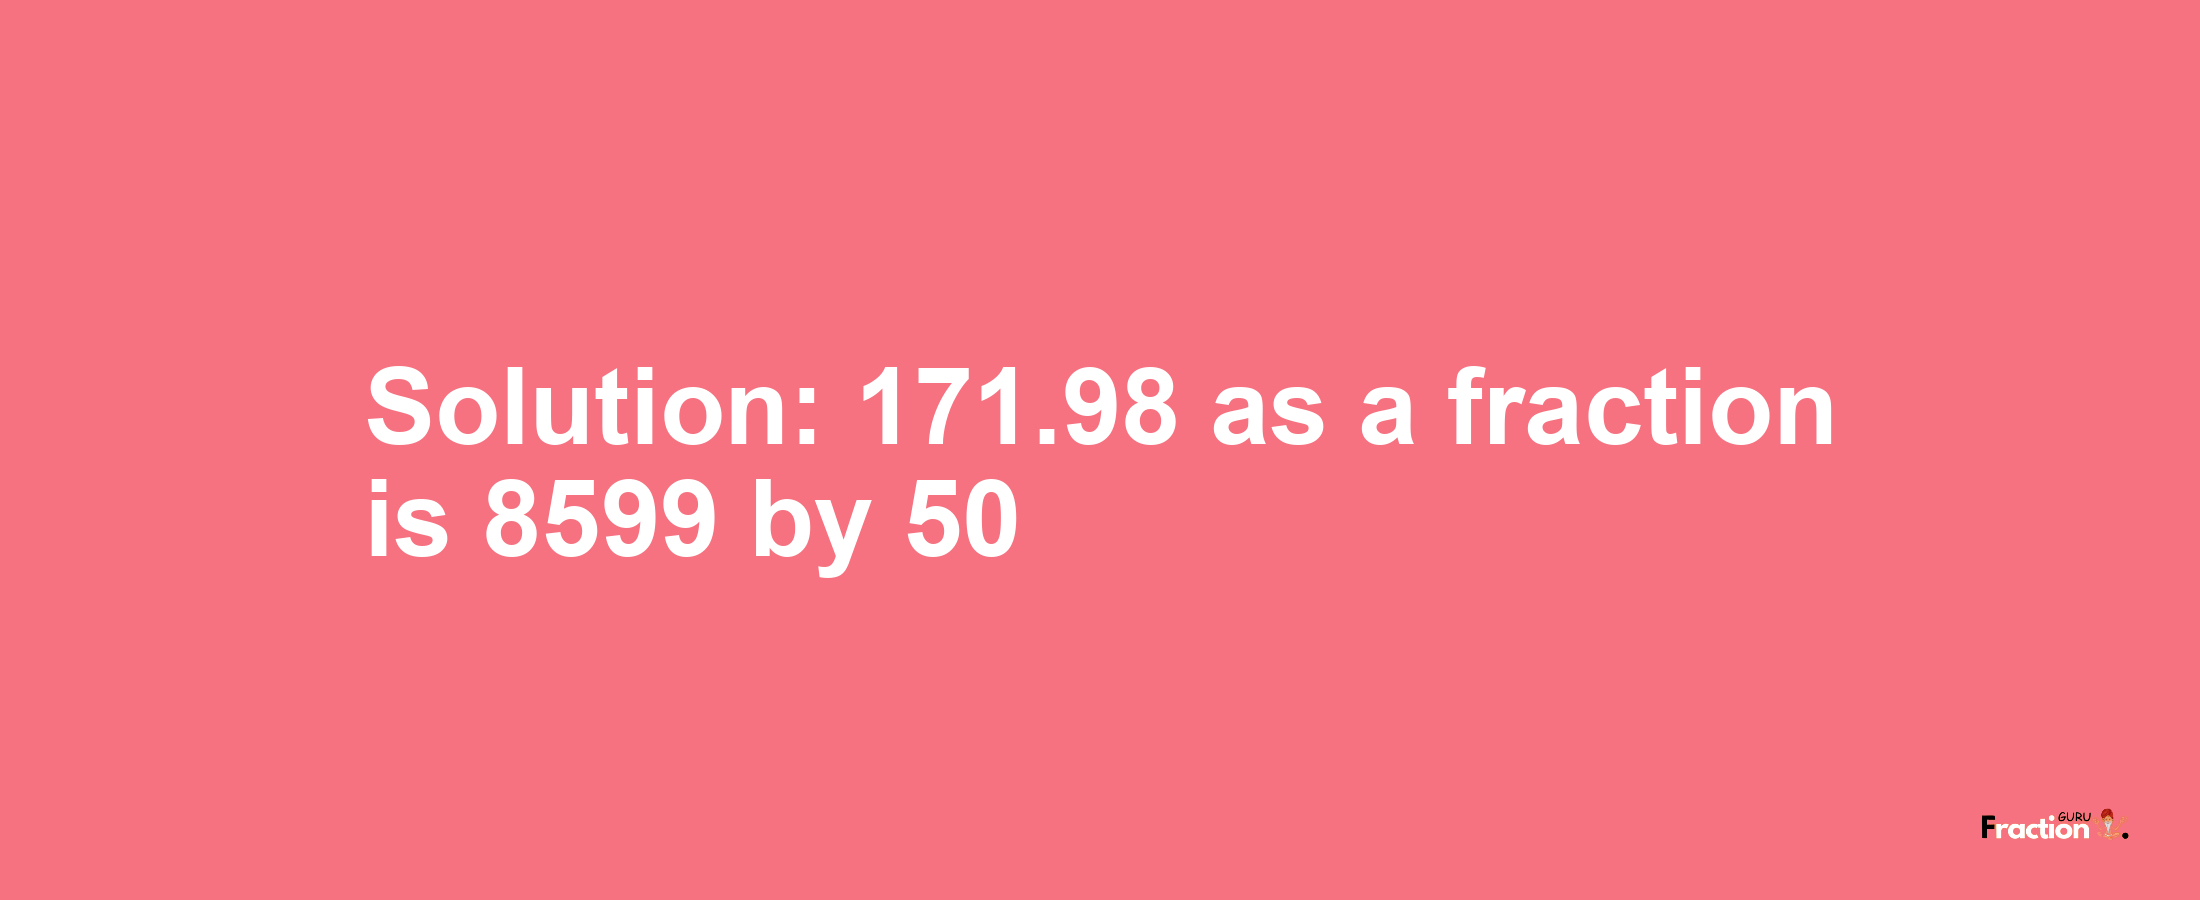 Solution:171.98 as a fraction is 8599/50